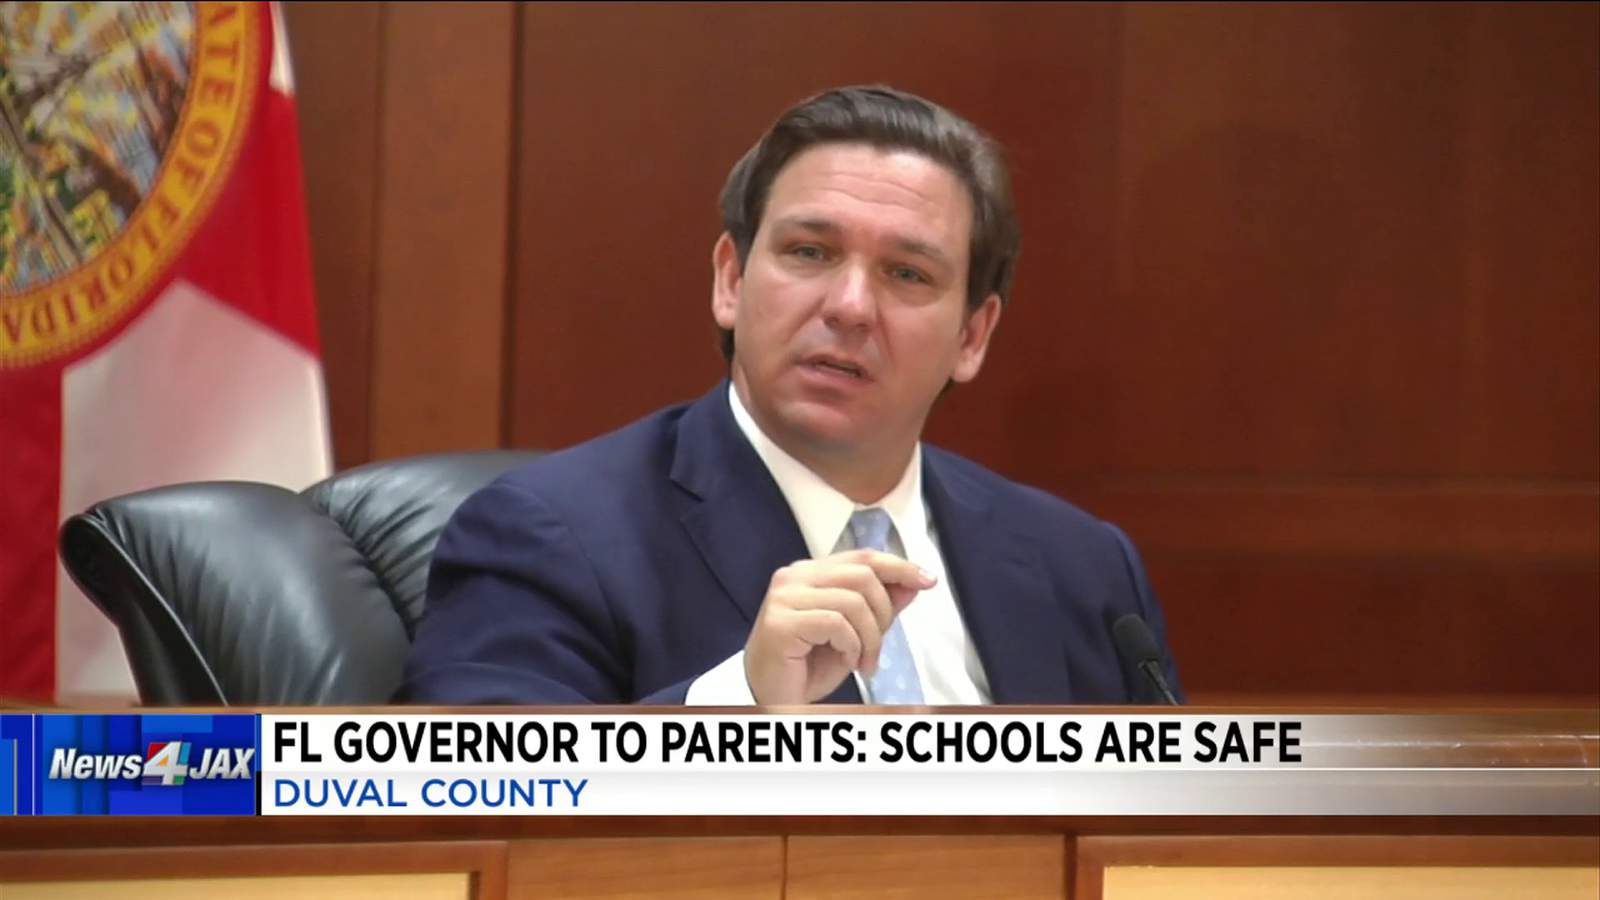 Govenor to parents: Schools are safe